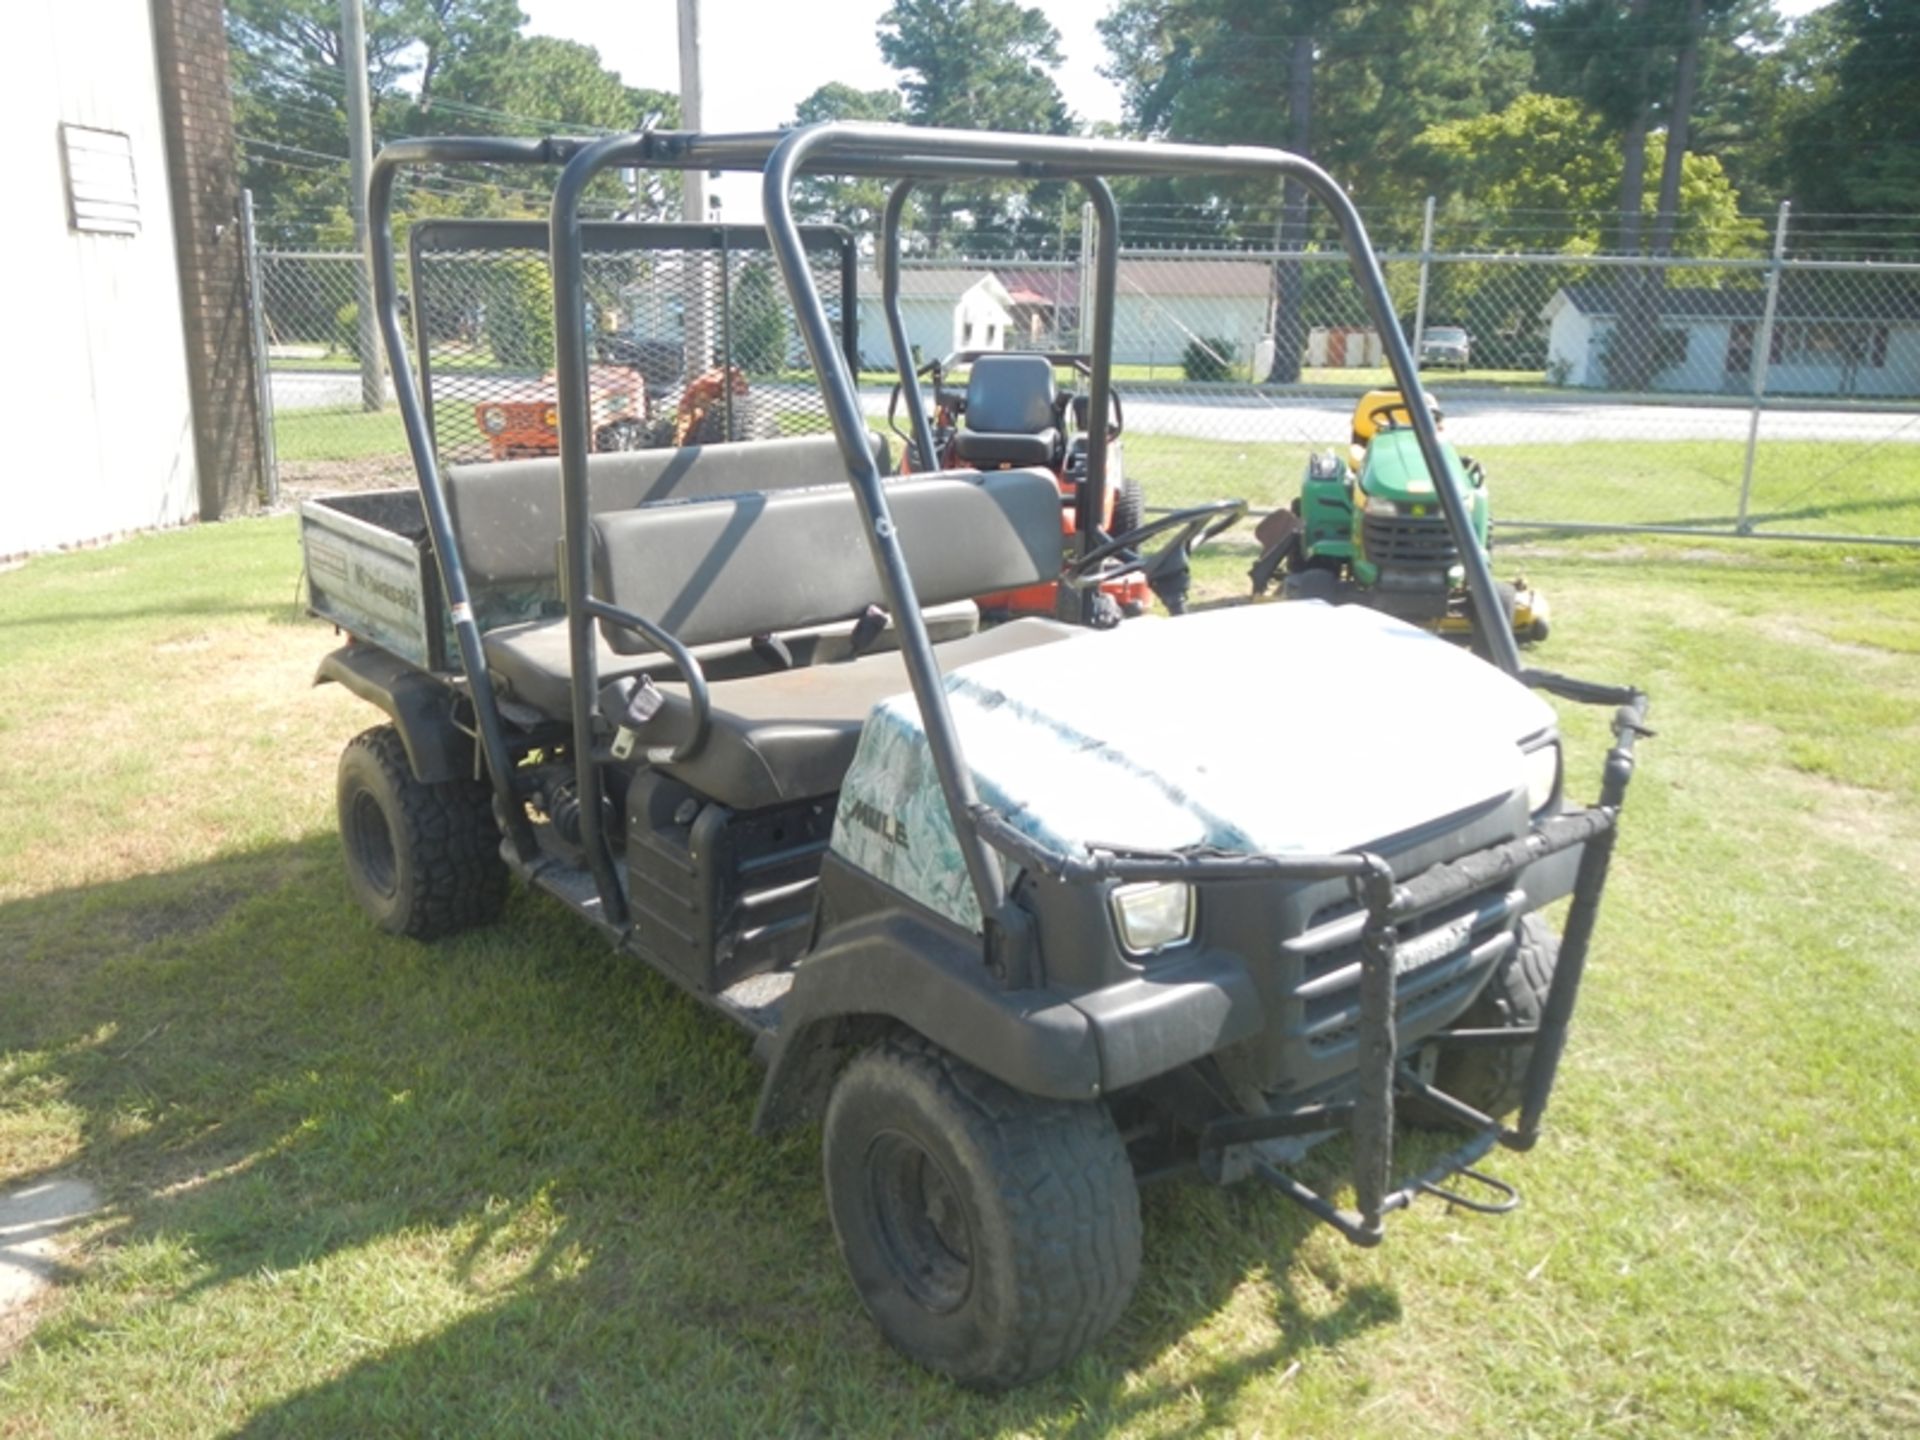 KAWASAKI Mule 3110 2-row seating w/dump body (has cooling system issues water will air lock and - Image 2 of 4